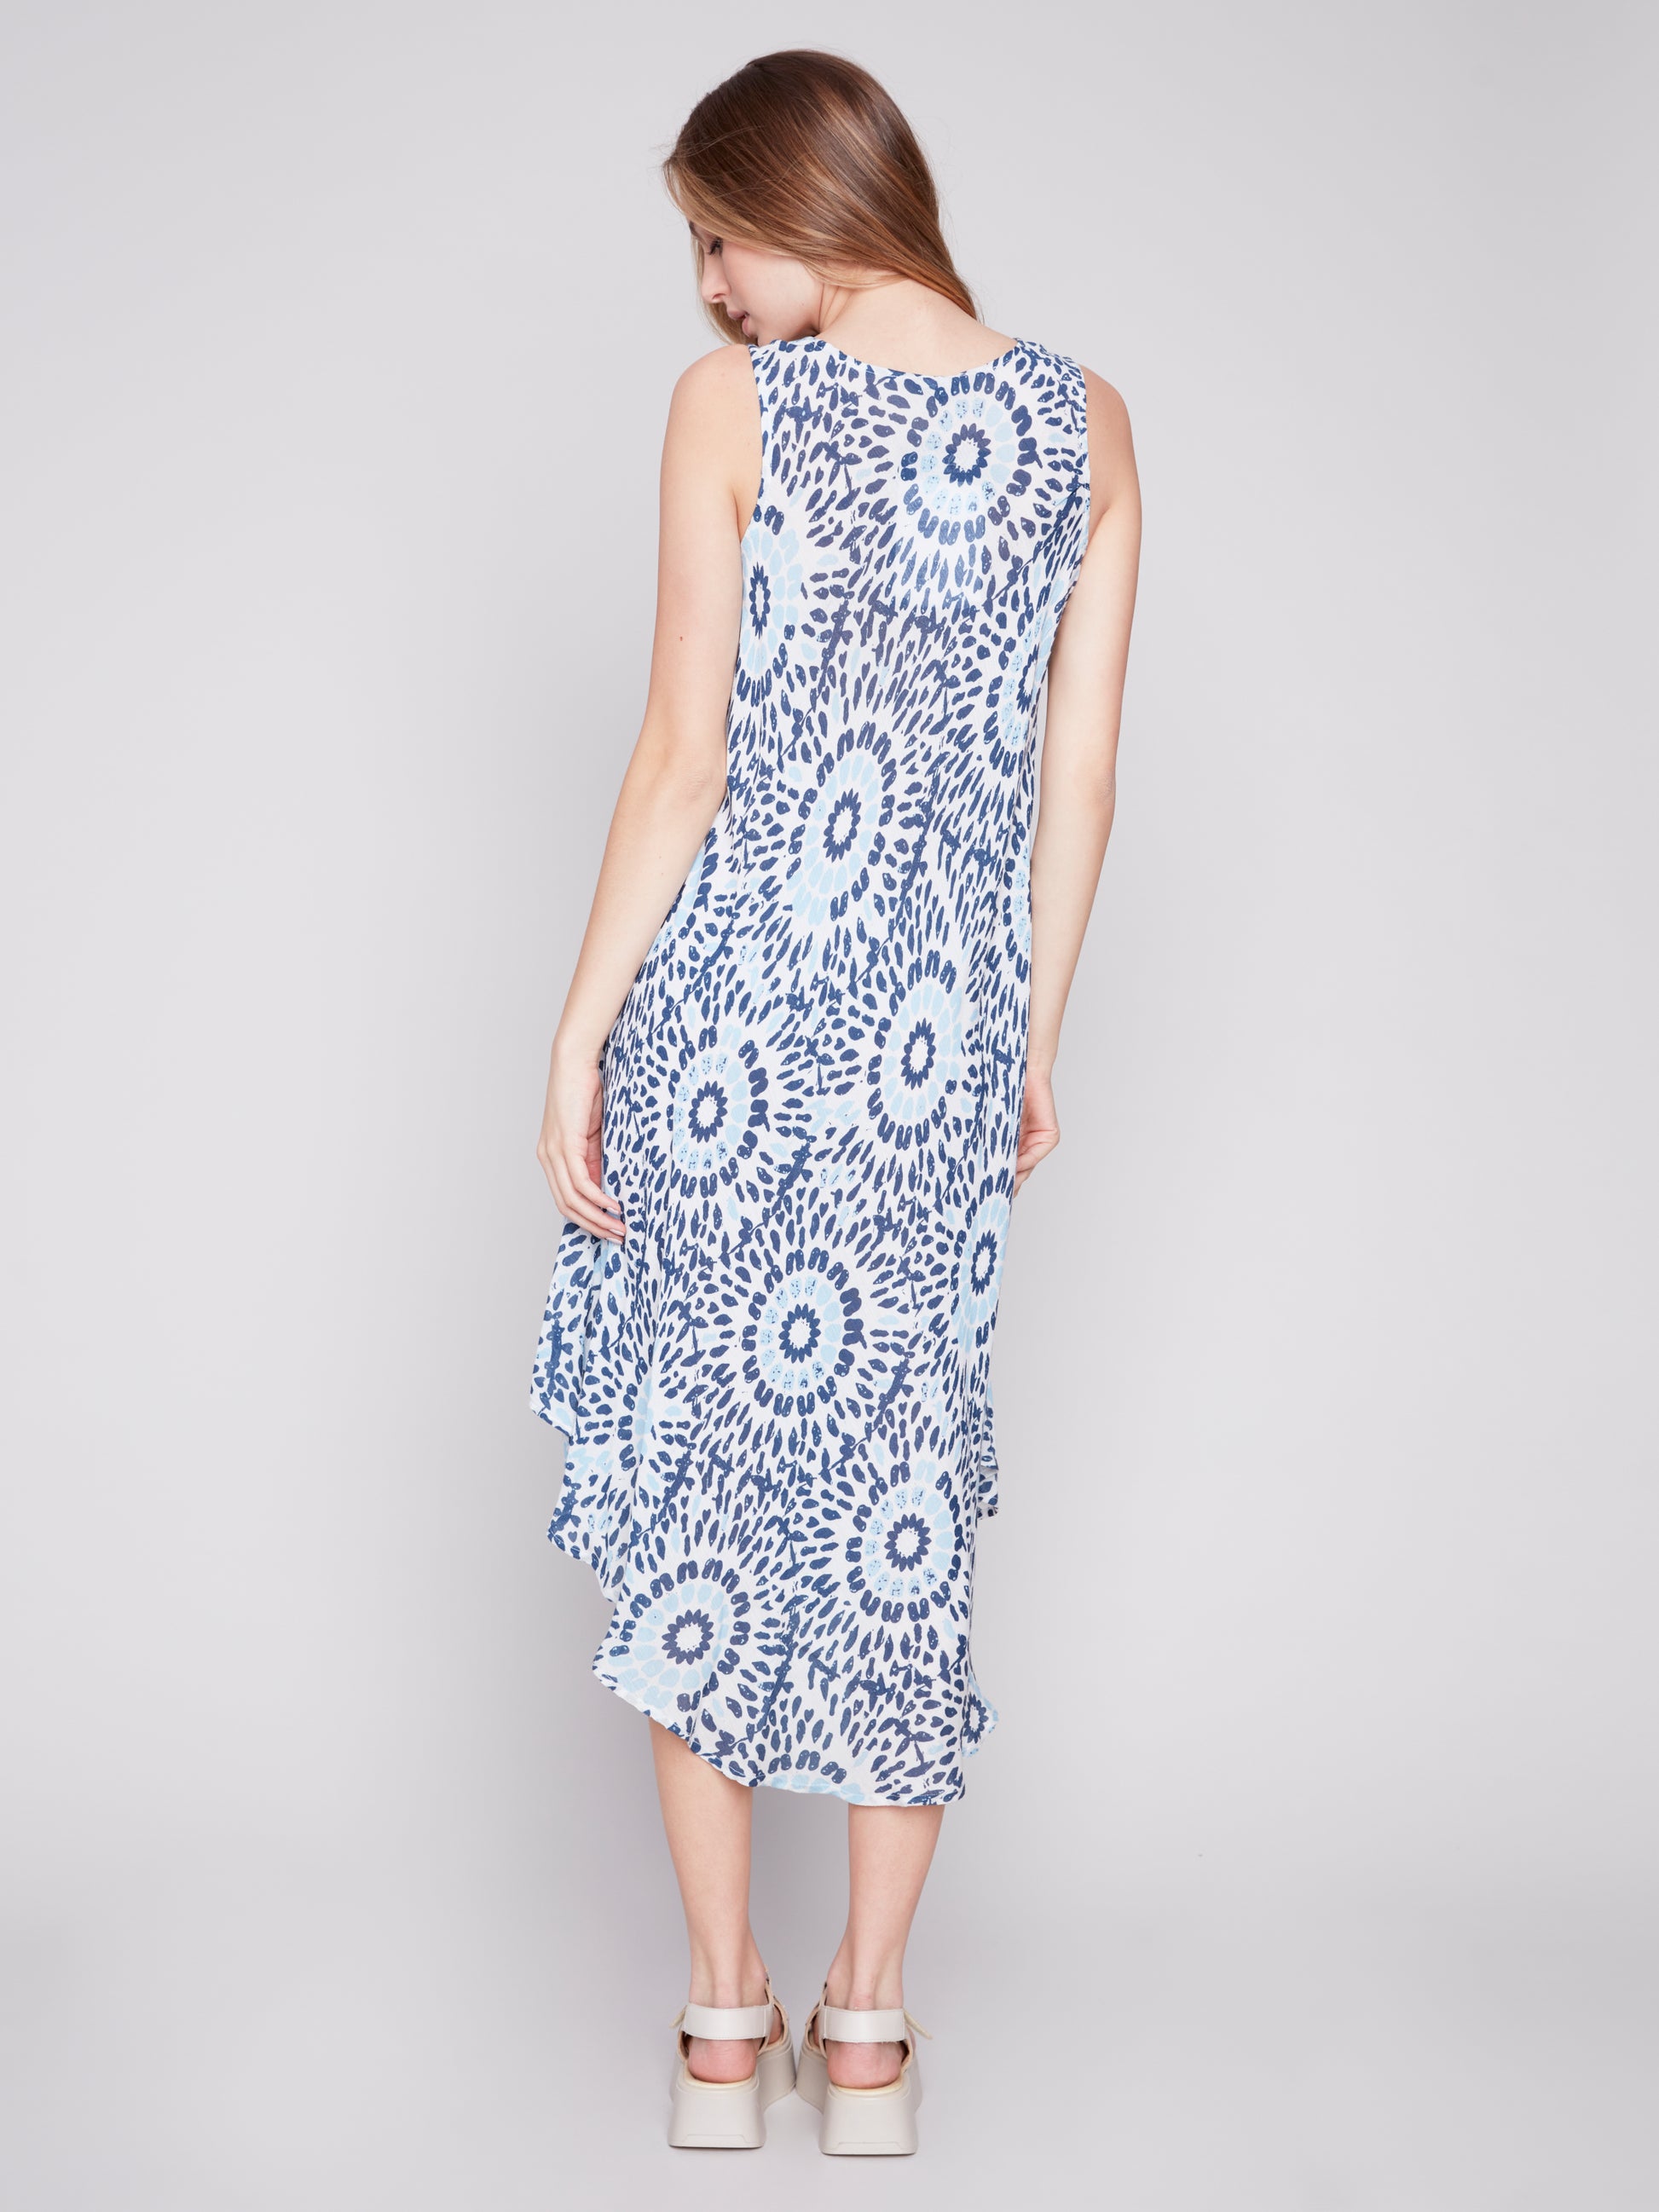 A woman wearing a Charlie B Sahara Print Rayon sleeveless dress in white and blue pattern and white sandals standing against a grey backdrop.